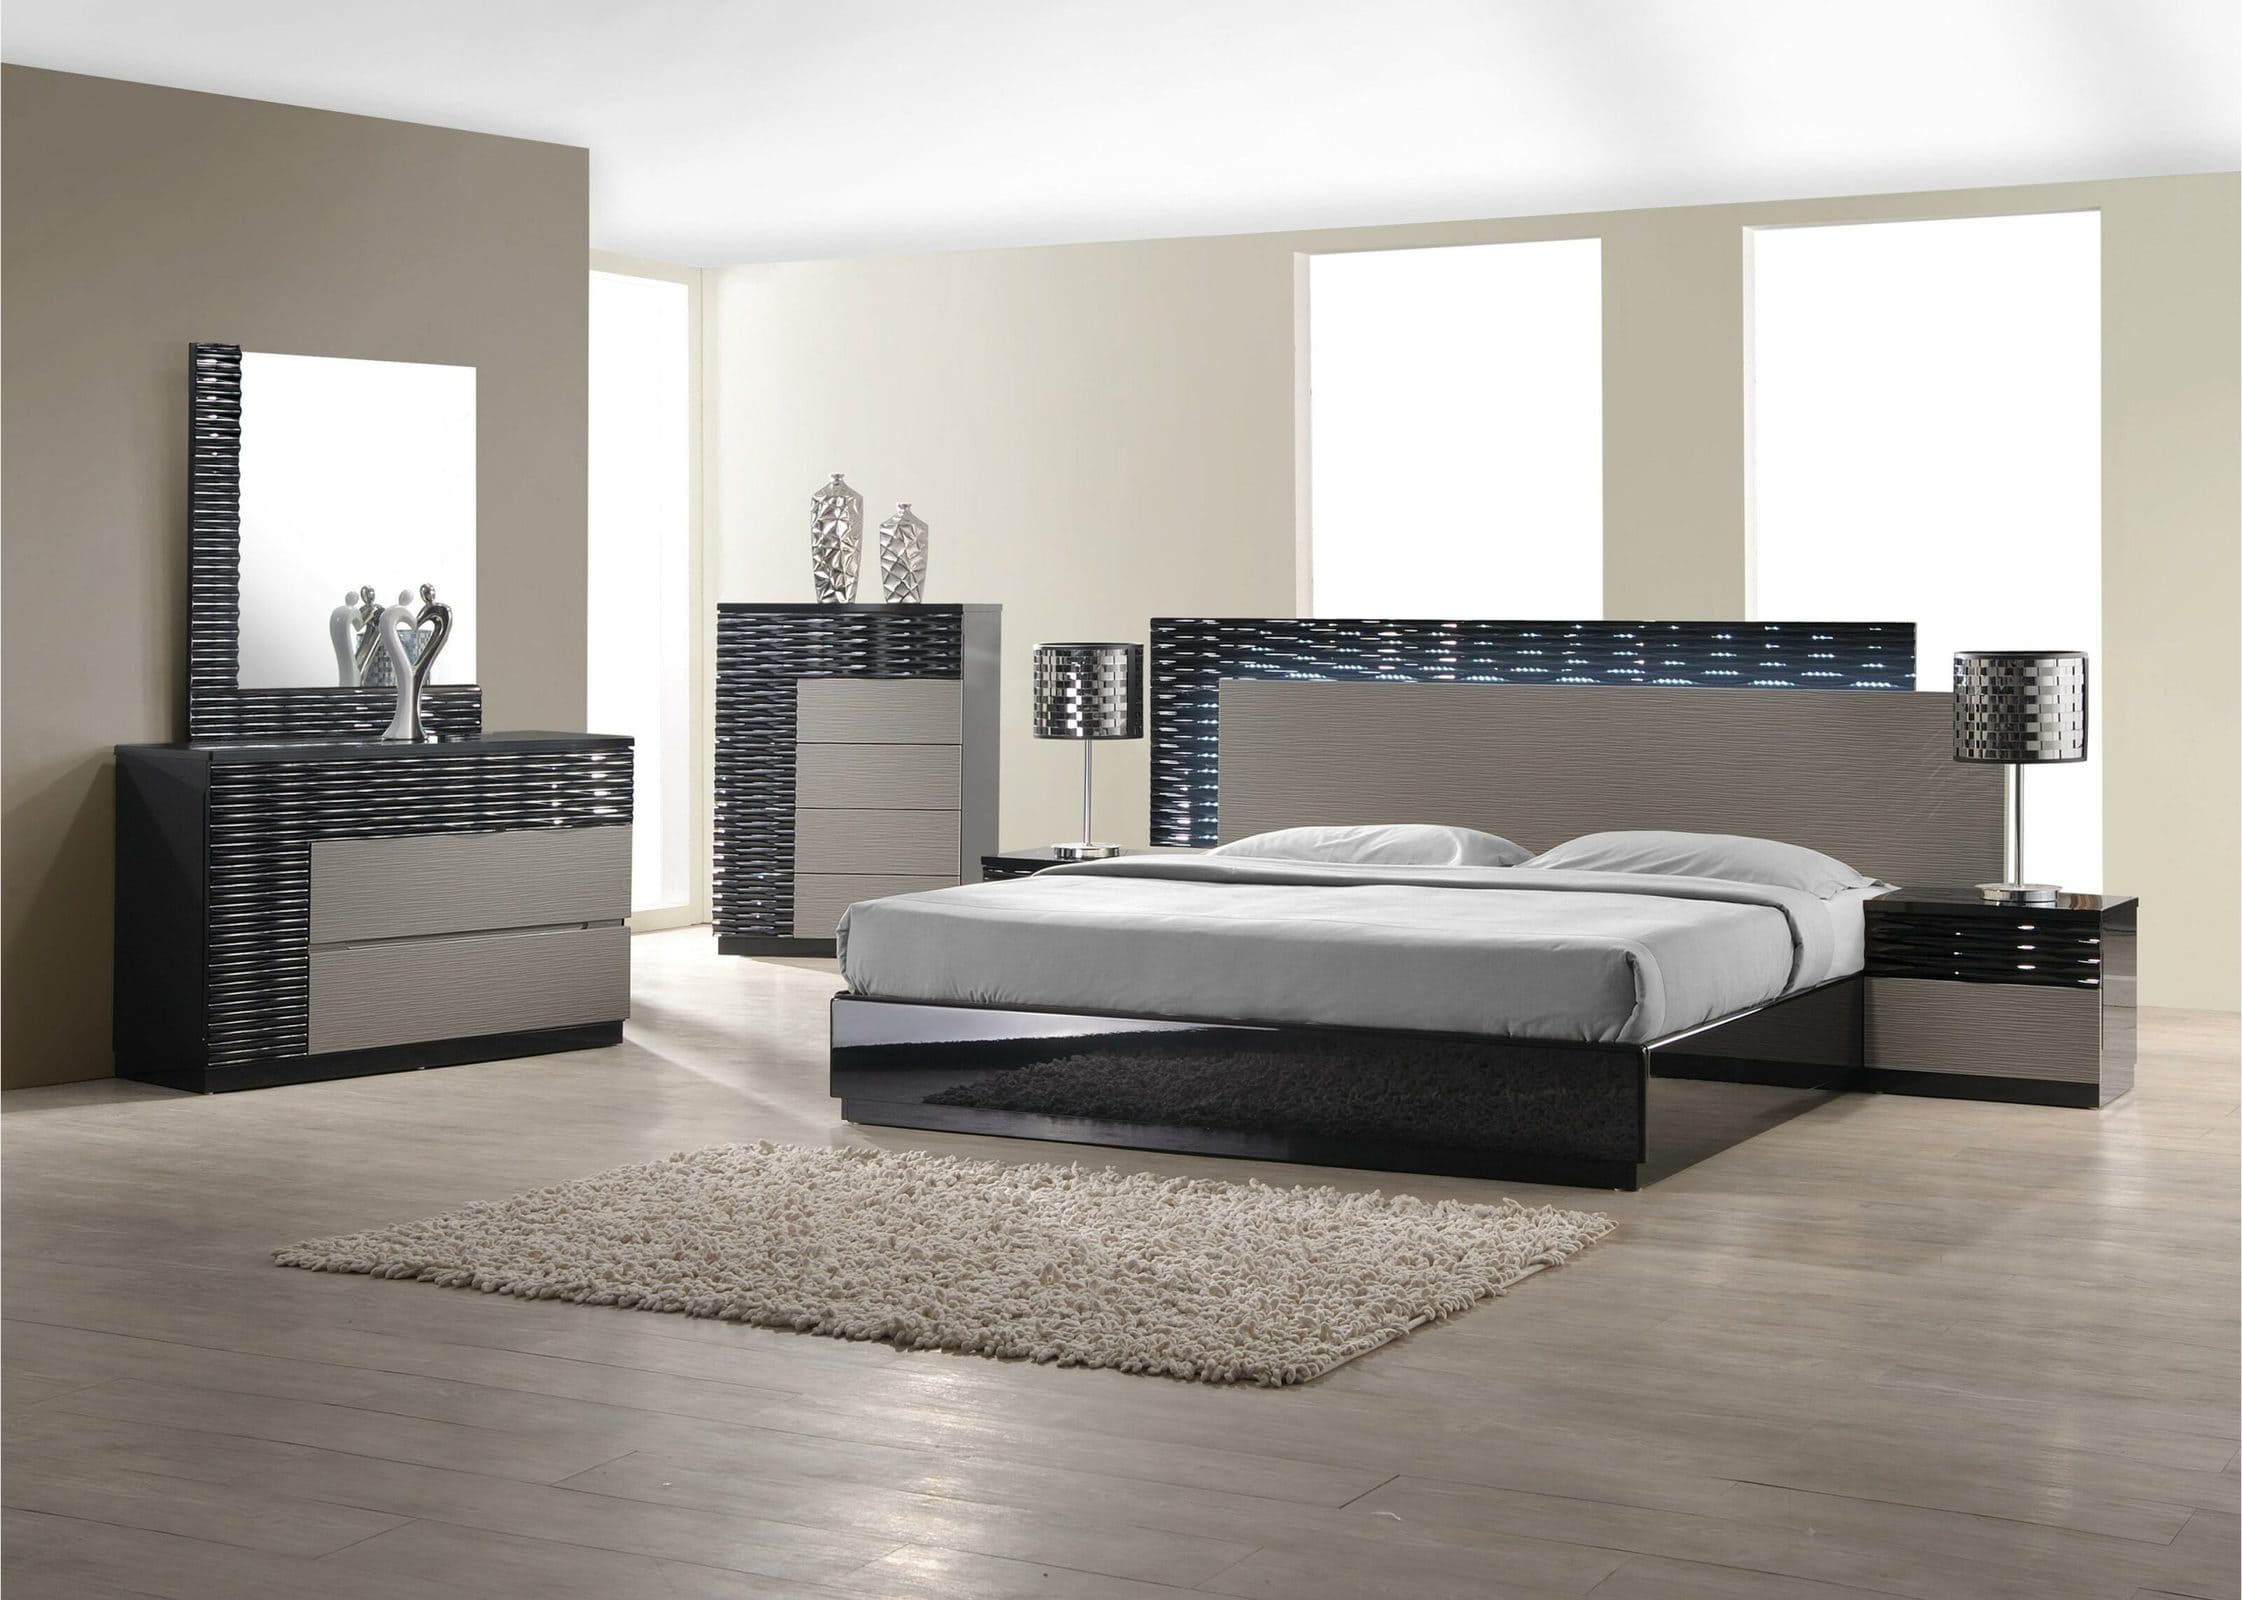 Use Sleek Dressers for a Contemporary Feel